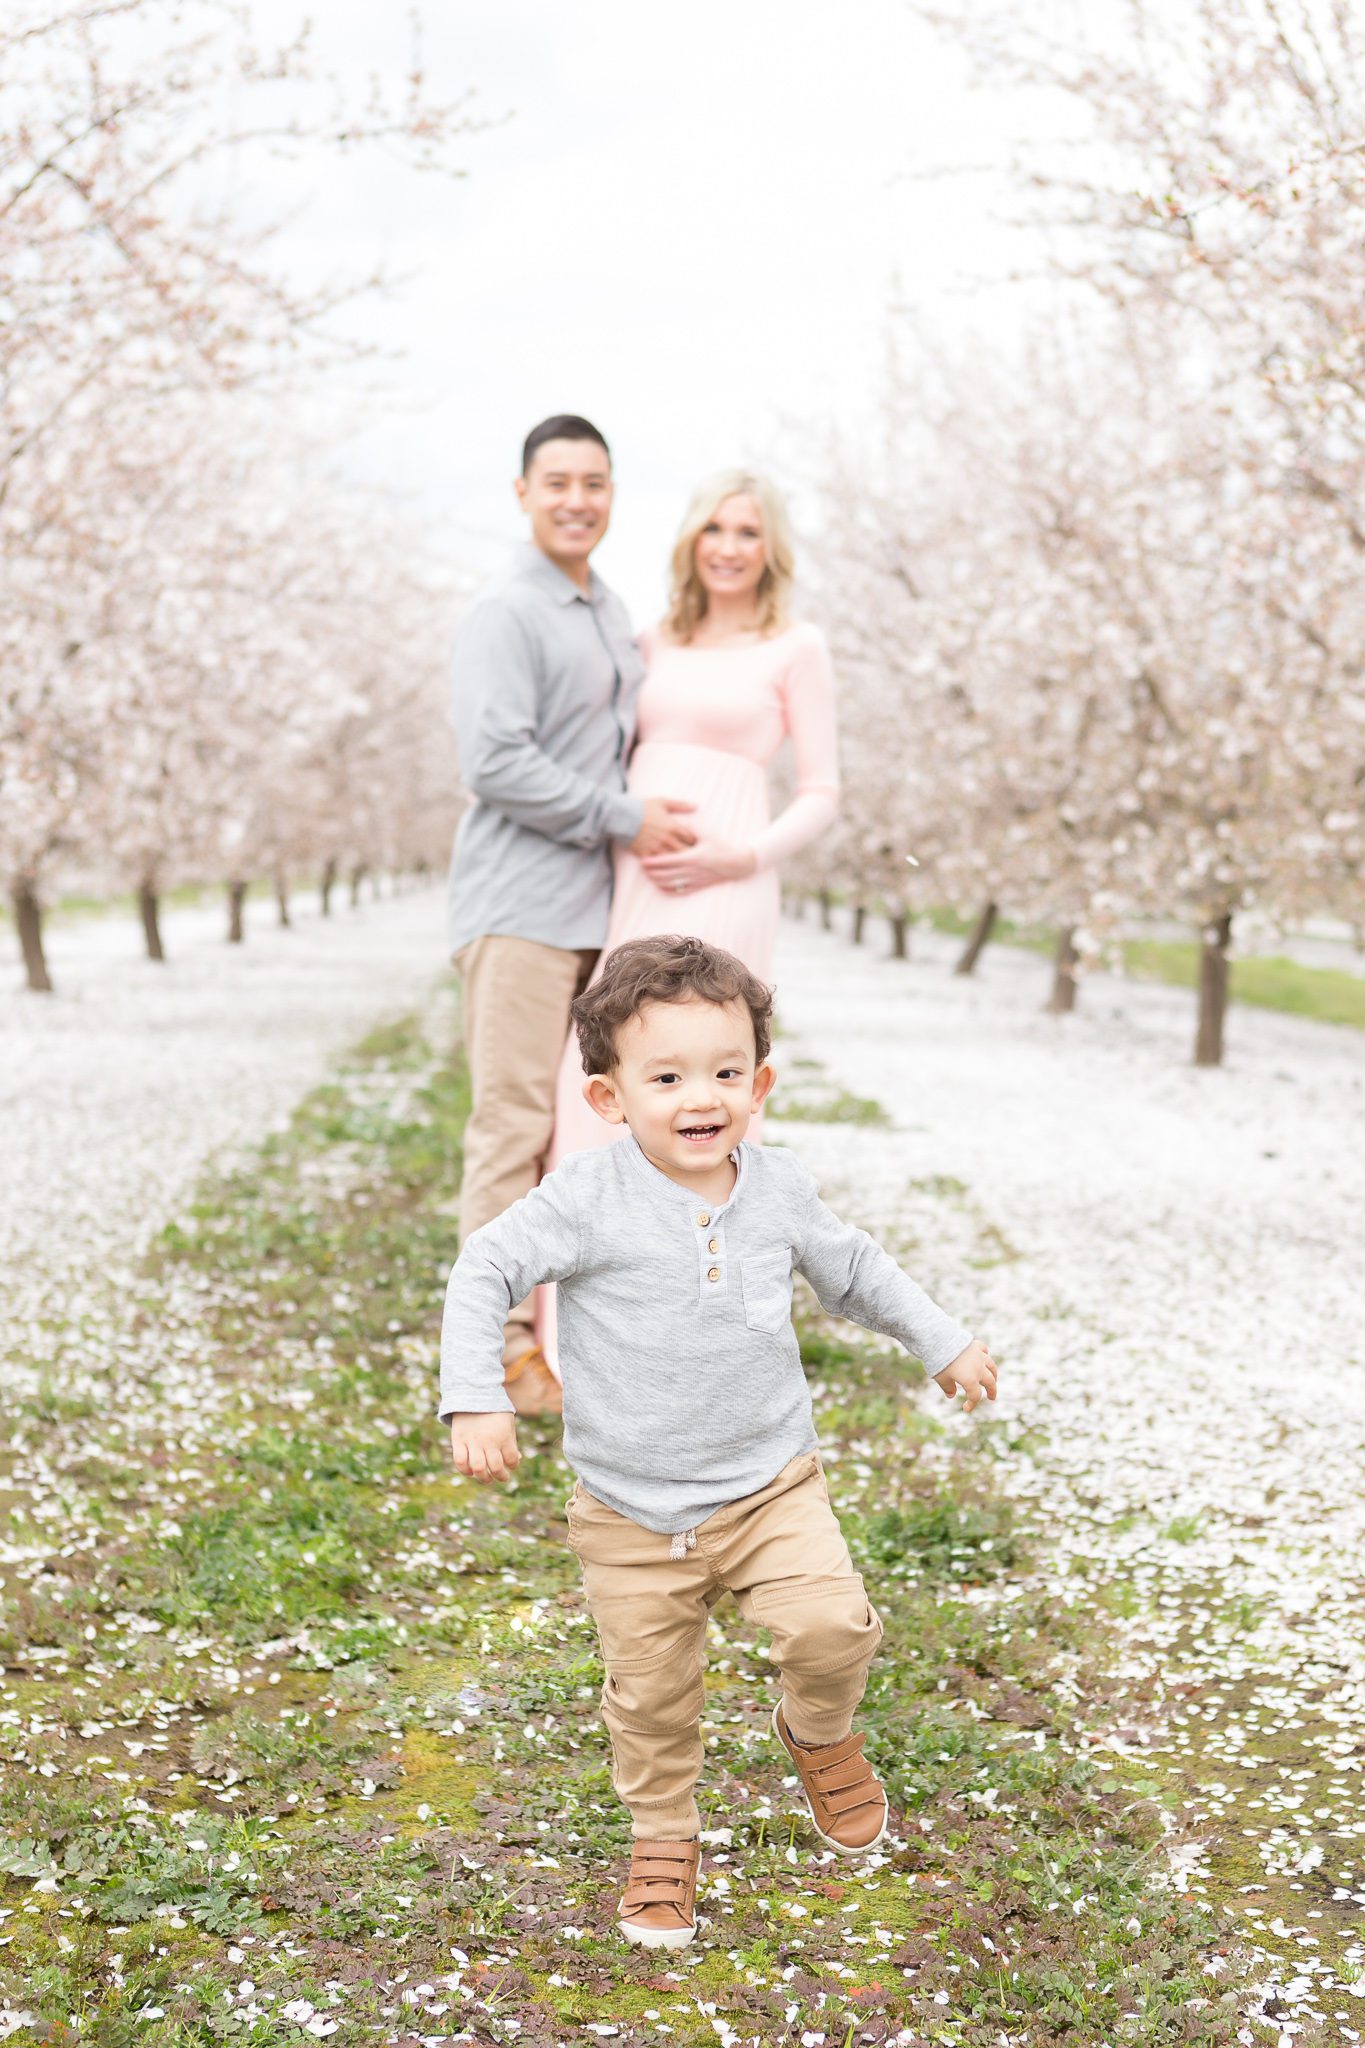 maternity photos, pink maternity dress, toddler running ahead of mom and dad in the blossoms